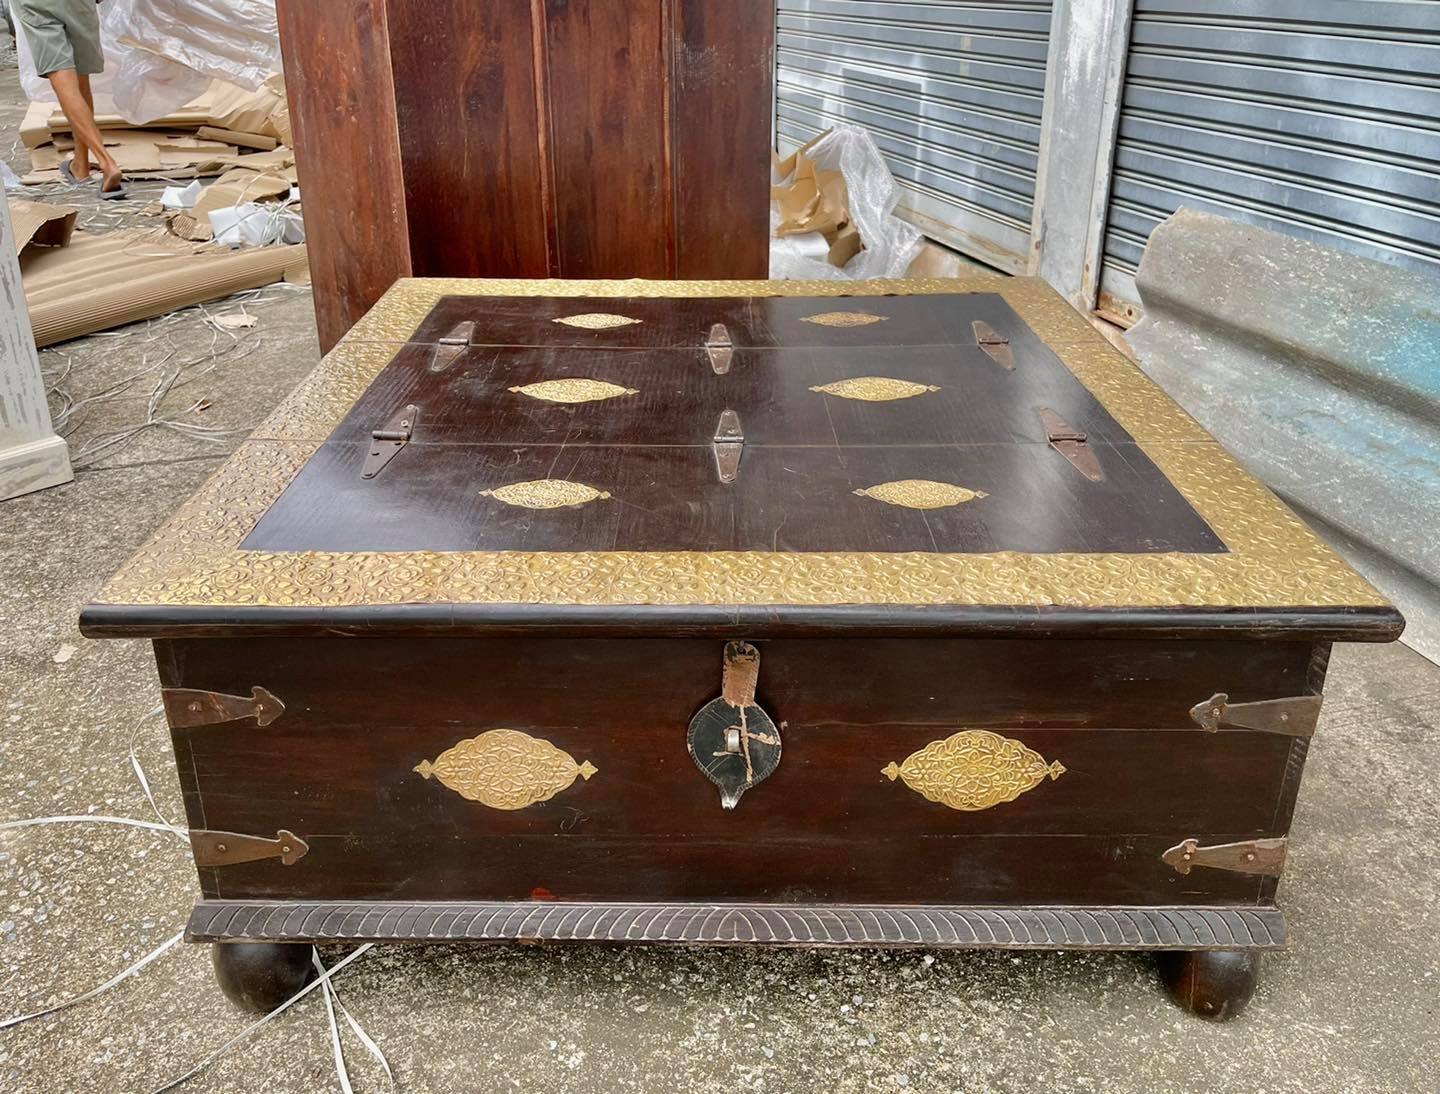 BX29 Vintage Wooden Chest with Brass Decor